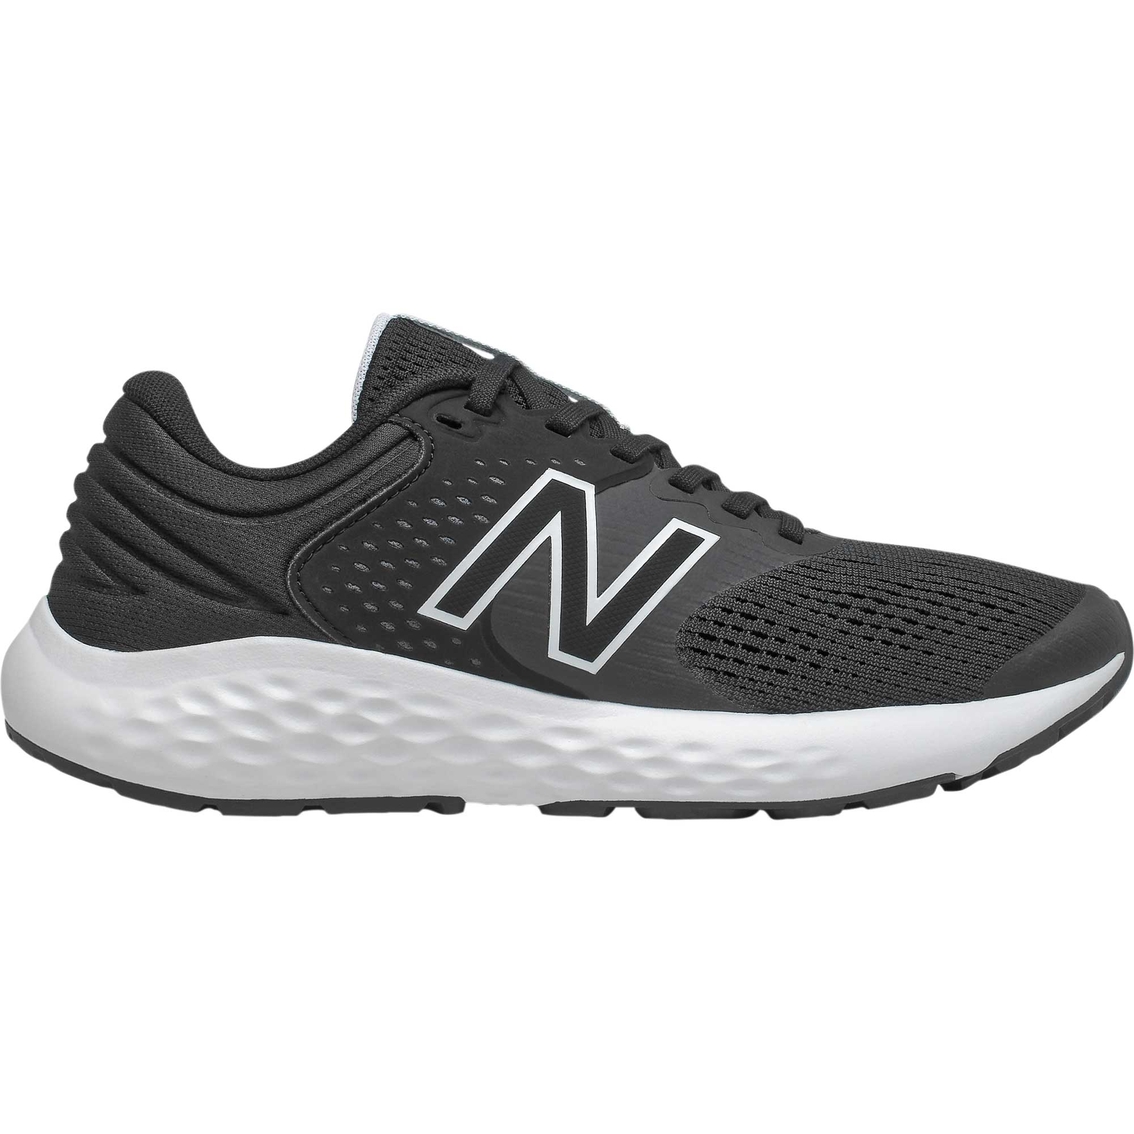 New Balance Women's W520lk7 Running Shoes | Women's Athletic Shoes ...